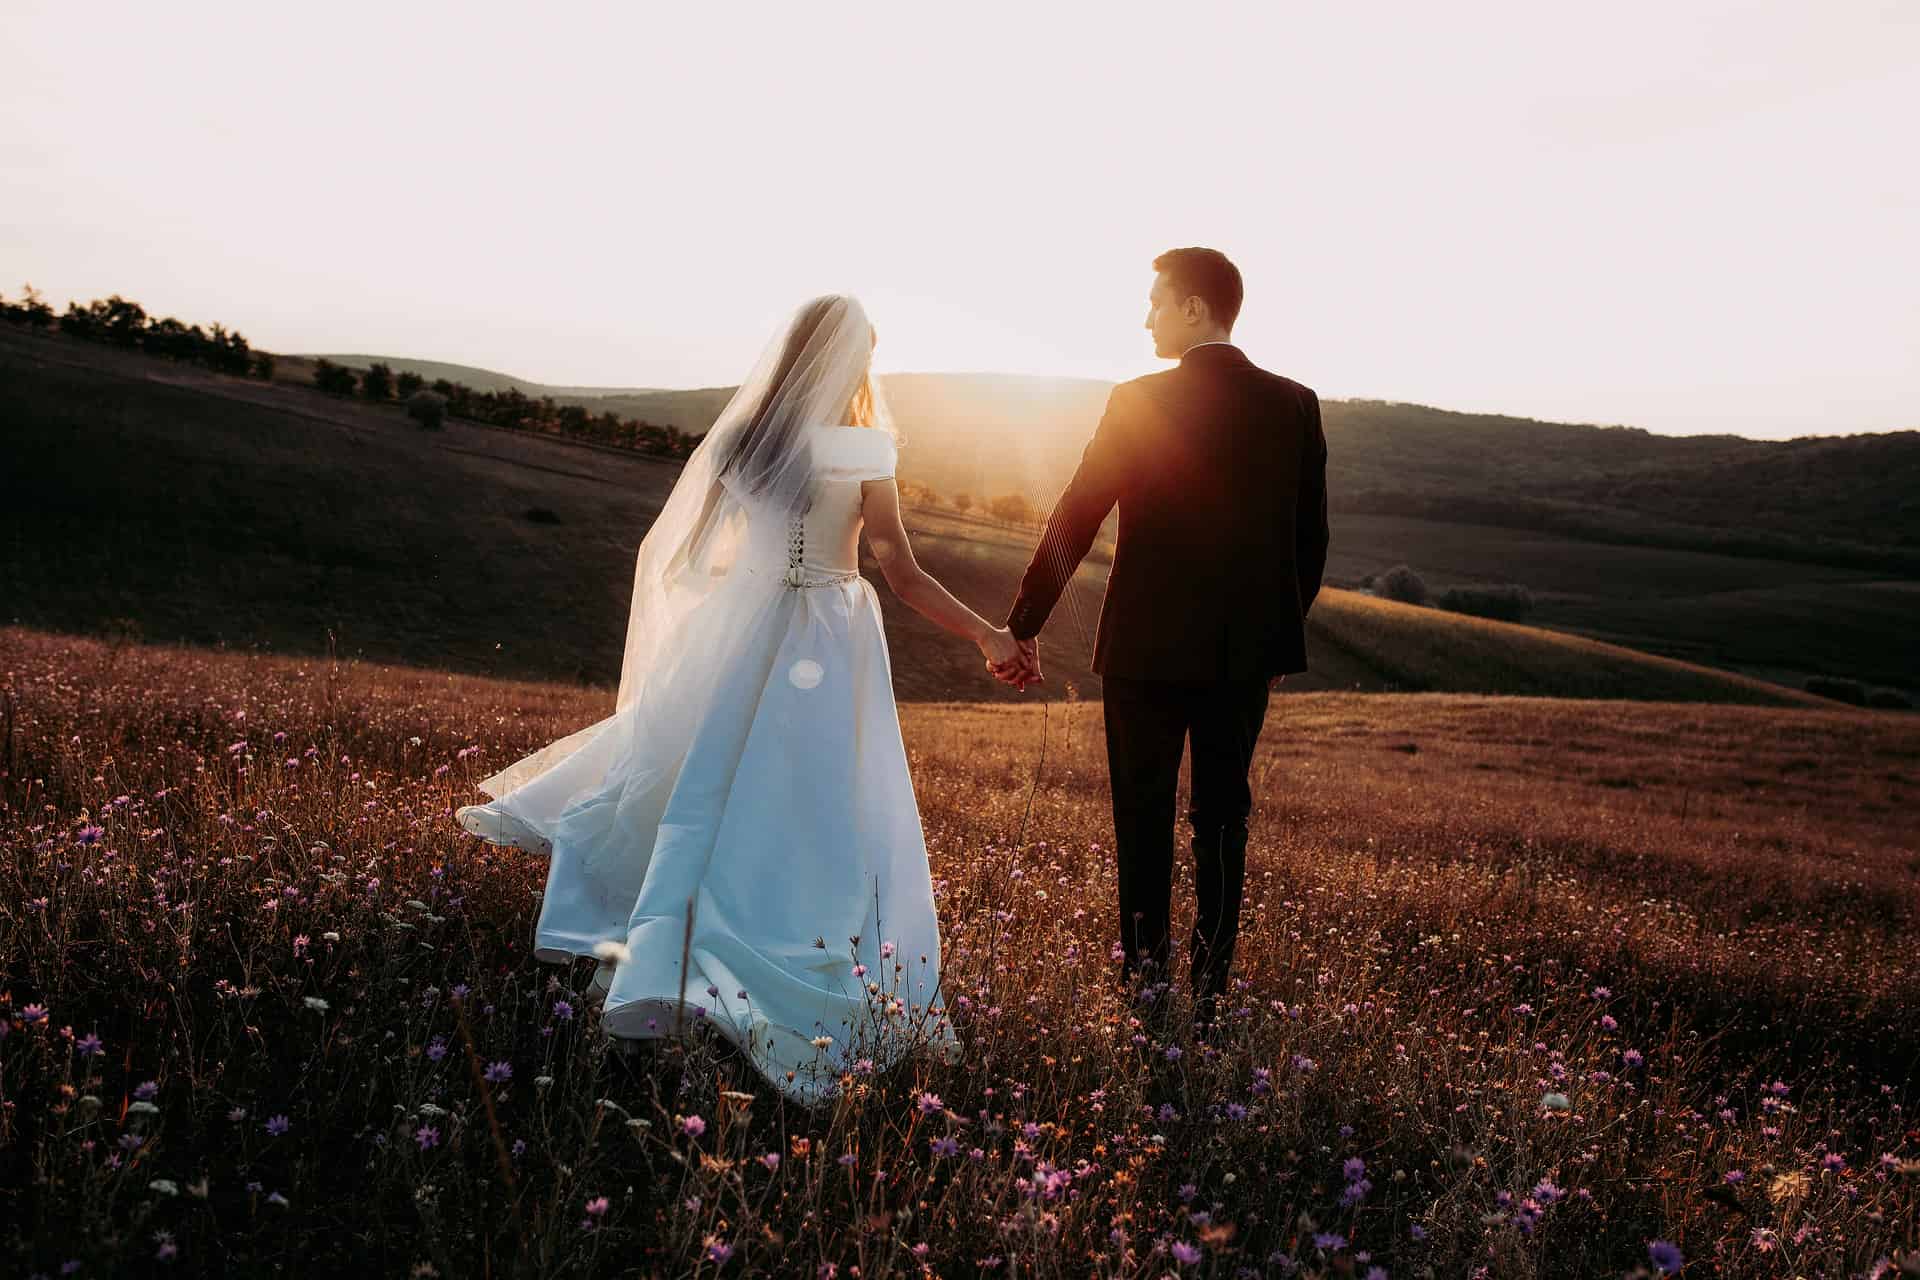 bride and groom outdoors